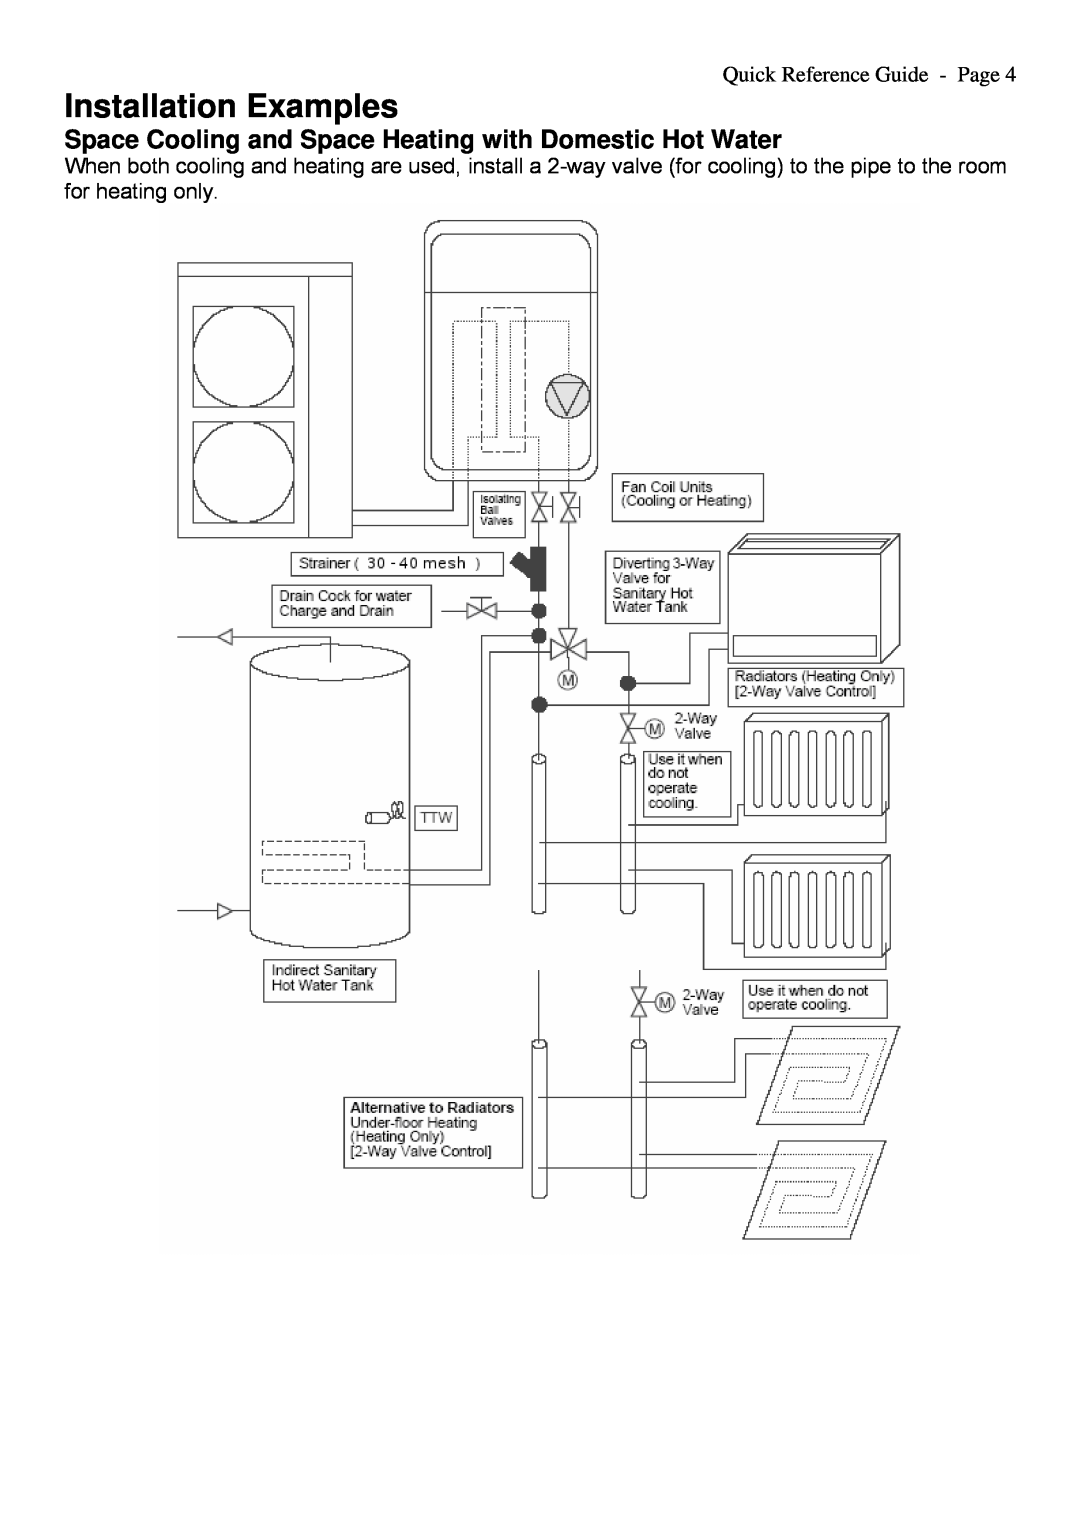 Toshiba A09-01P manual Installation Examples, Quick Reference Guide - Page 